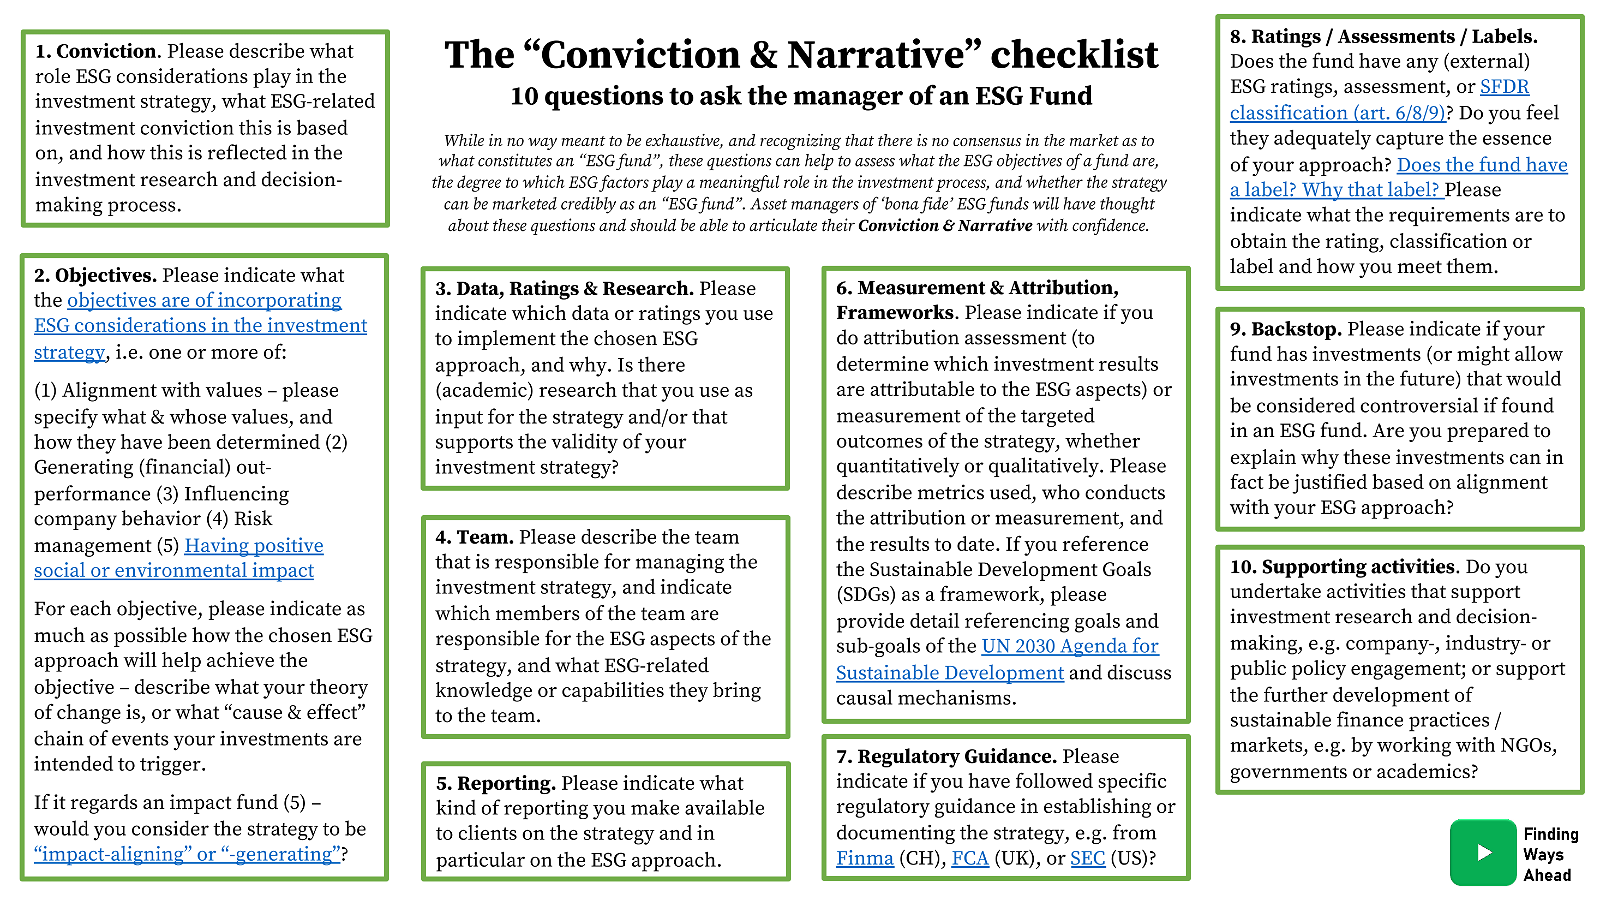 The “Conviction & Narrative” checklist: 10 questions to ask the manager of an ESG Fund